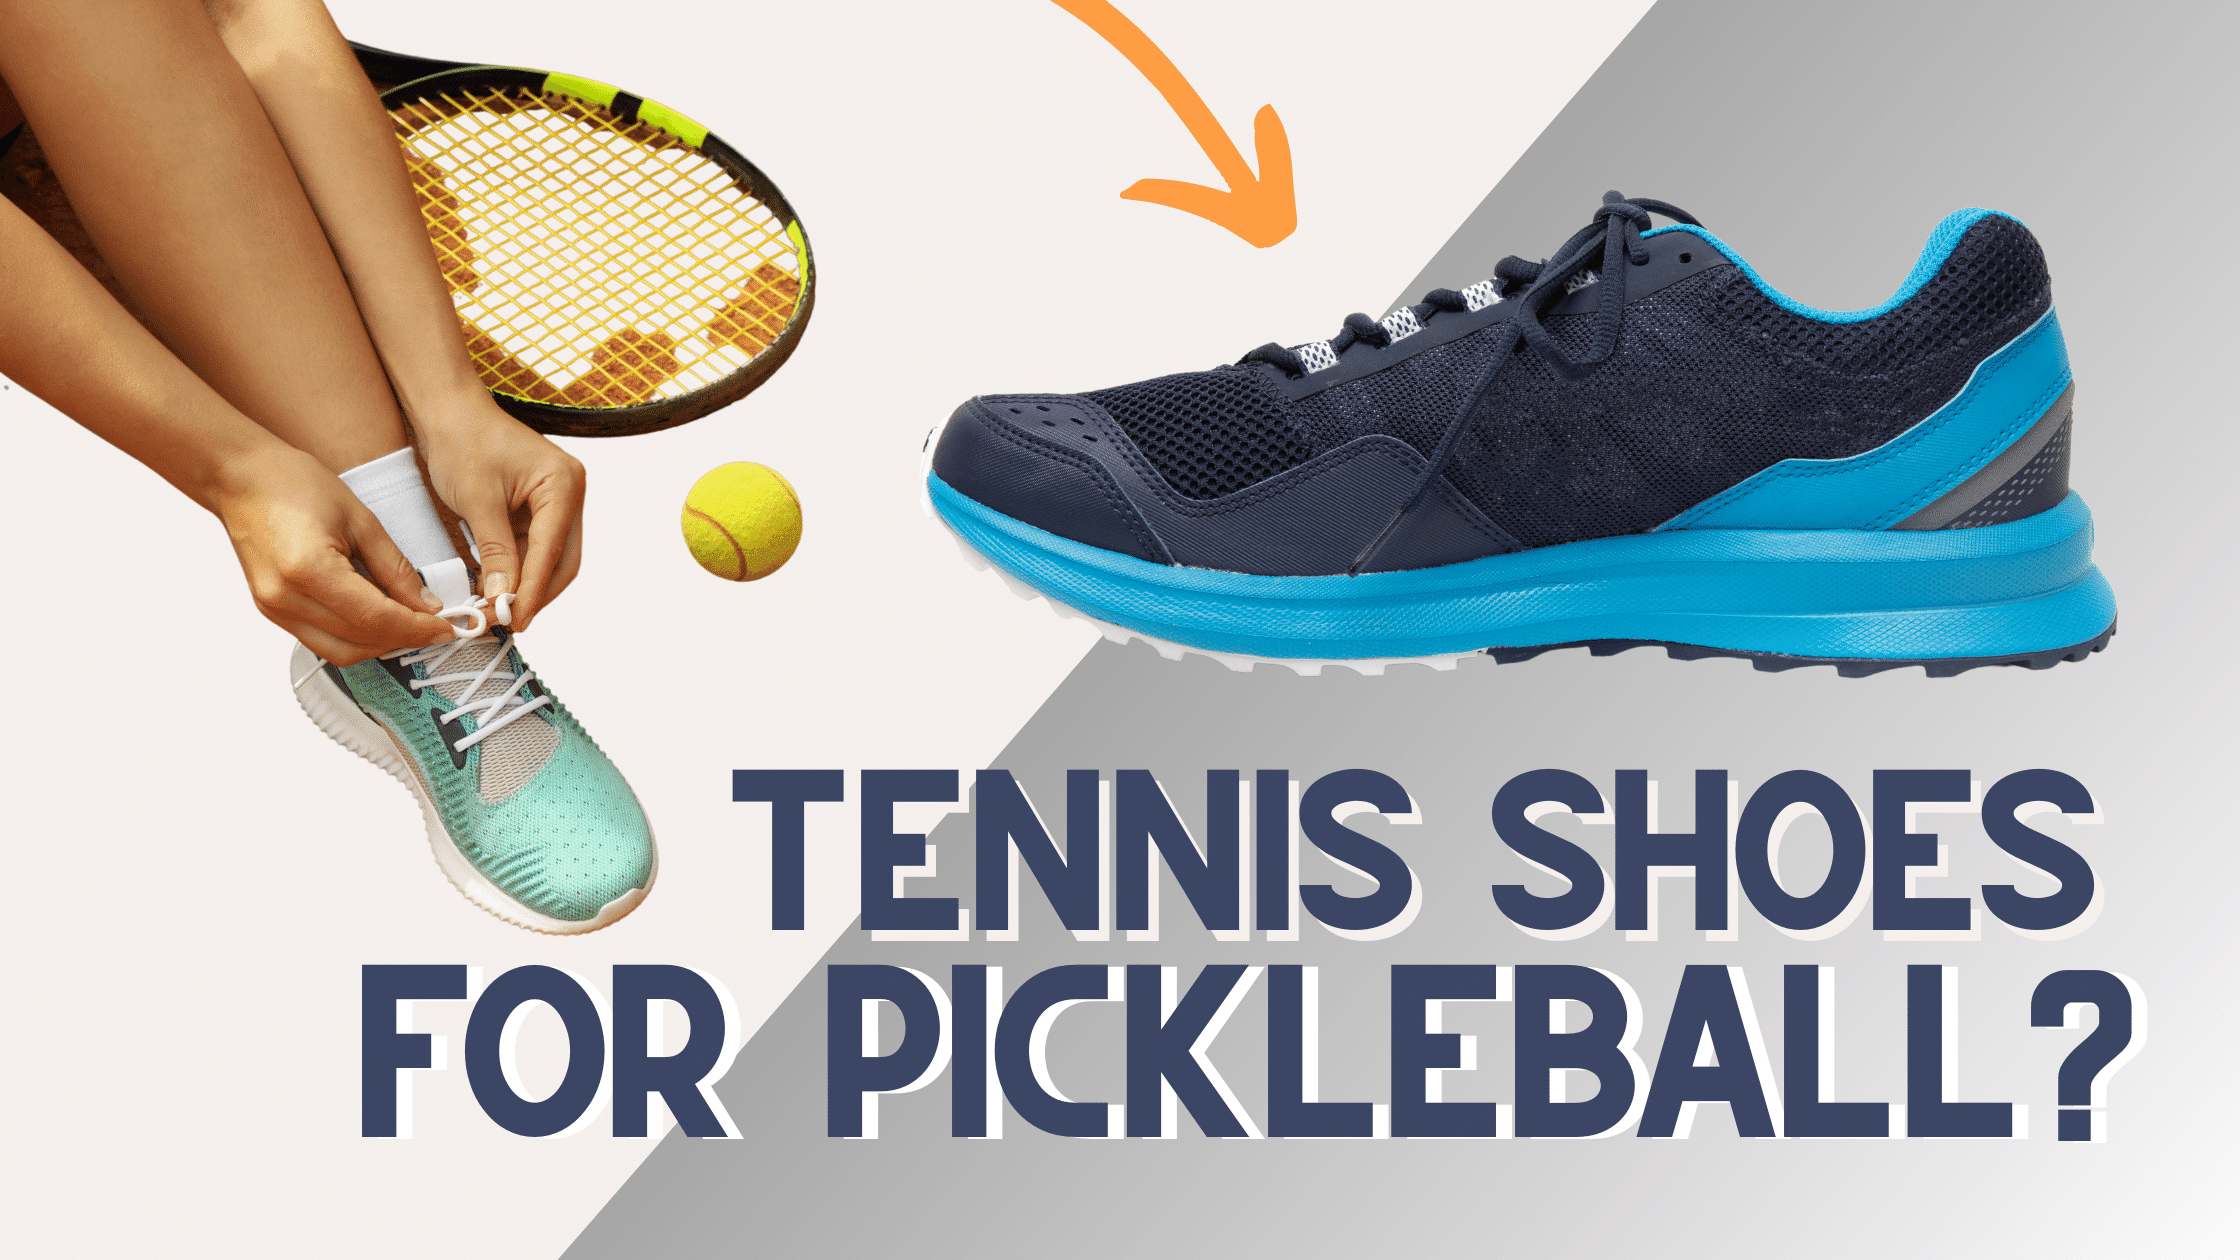 Can You Wear Tennis Shoes for Pickleball